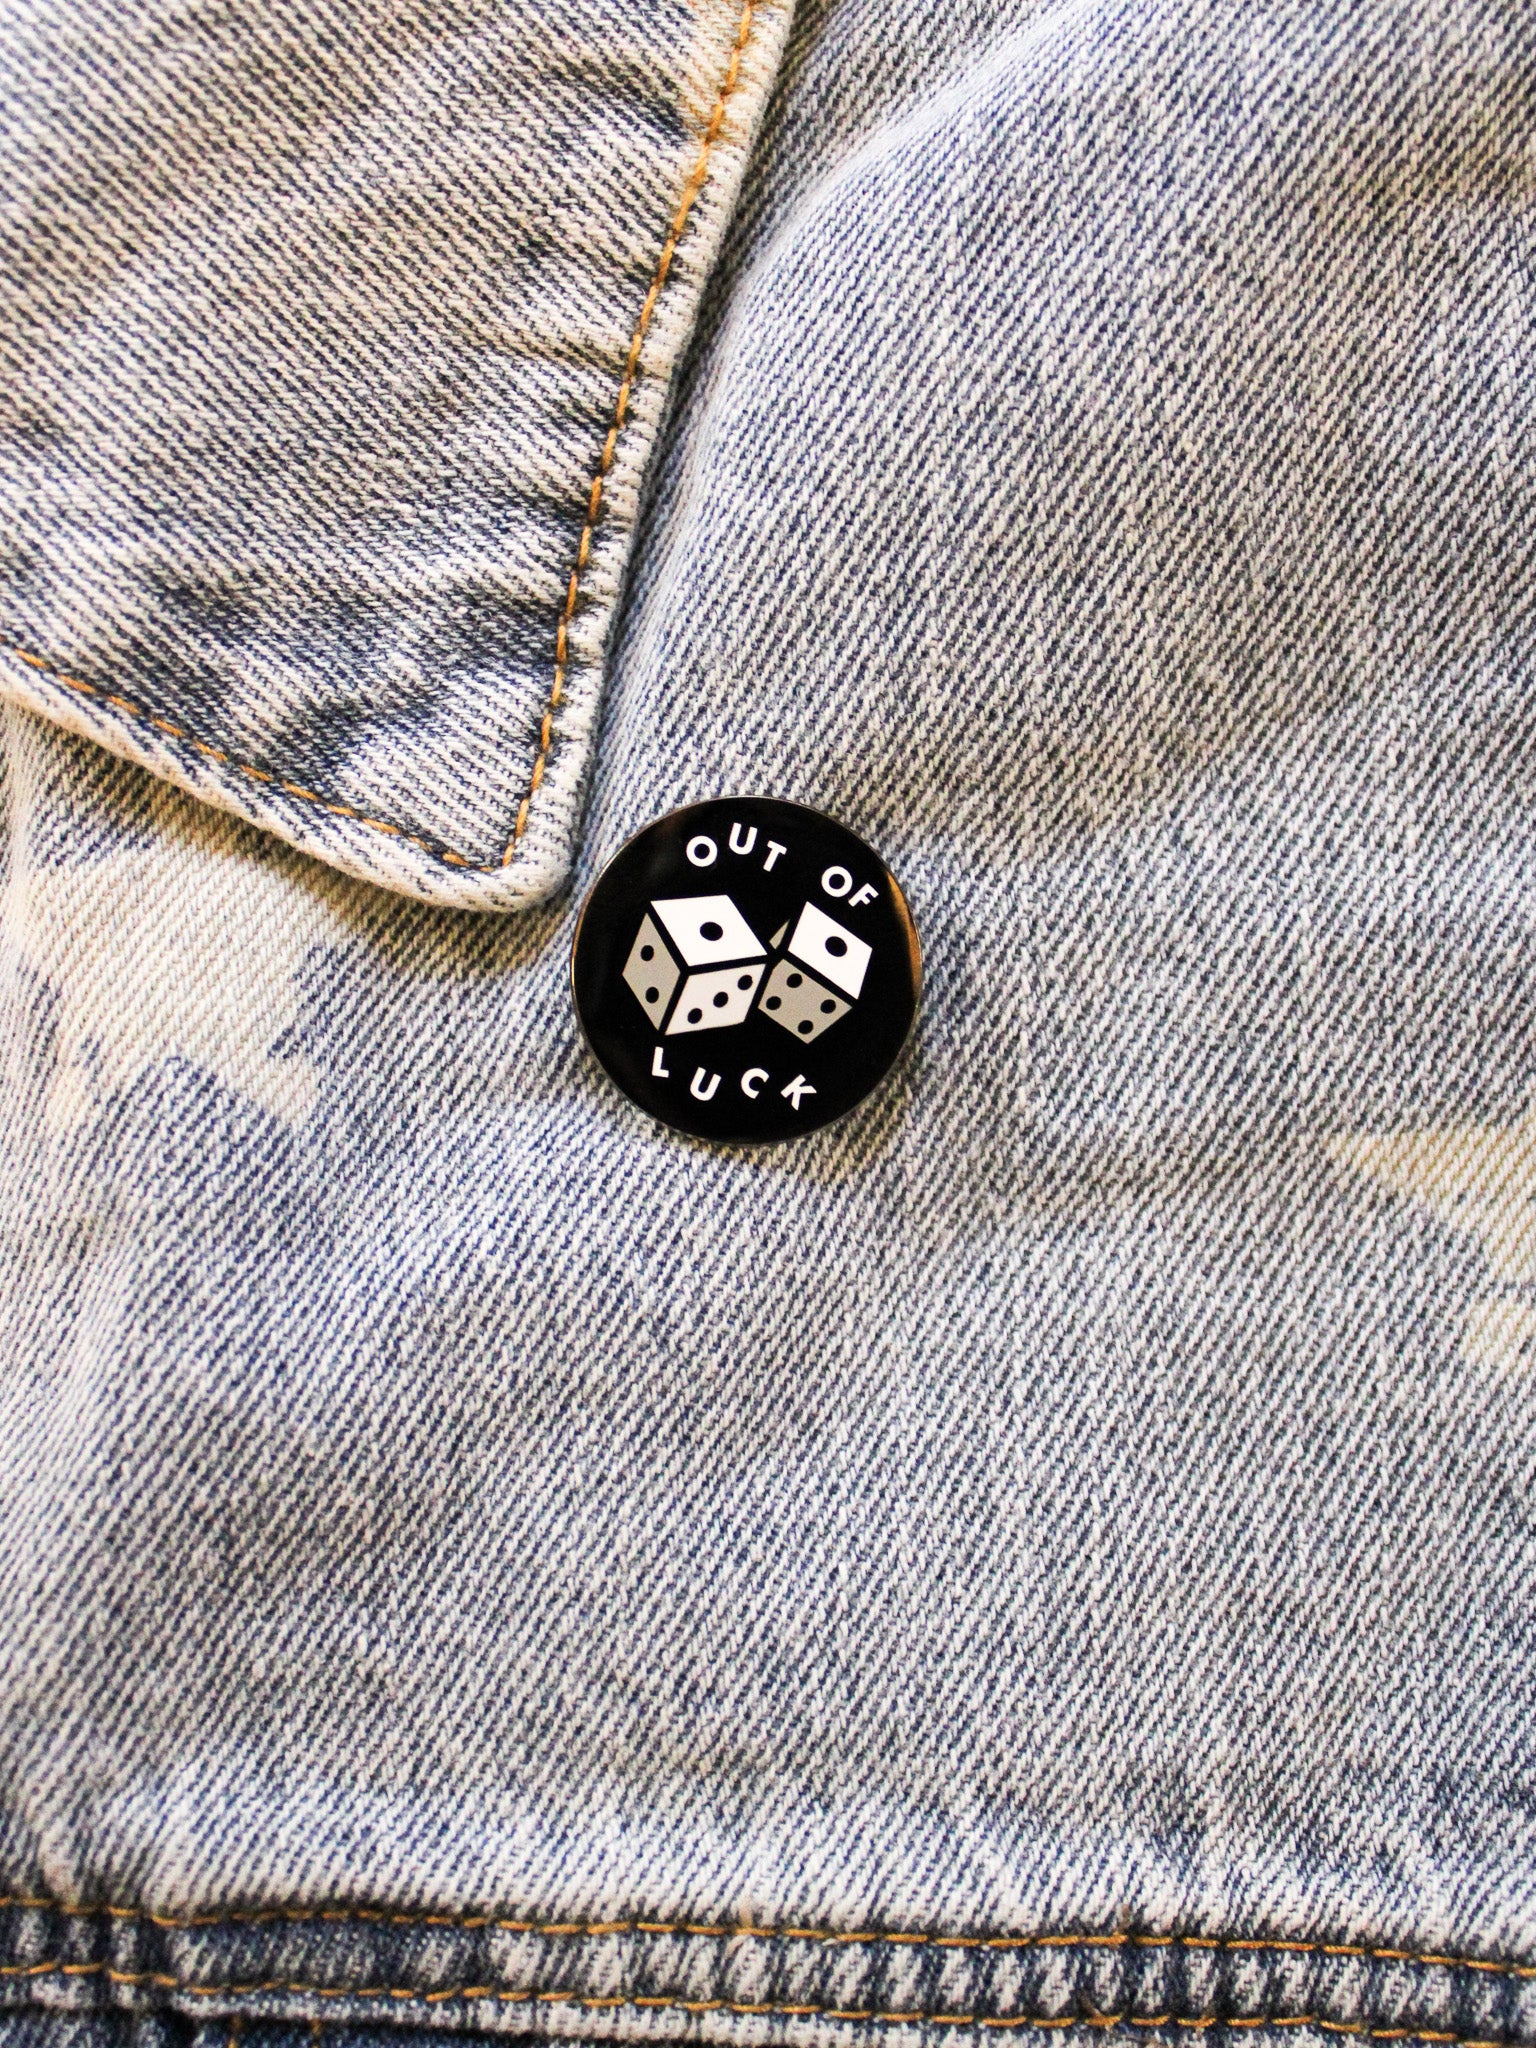 Out of Luck Enamel Pin